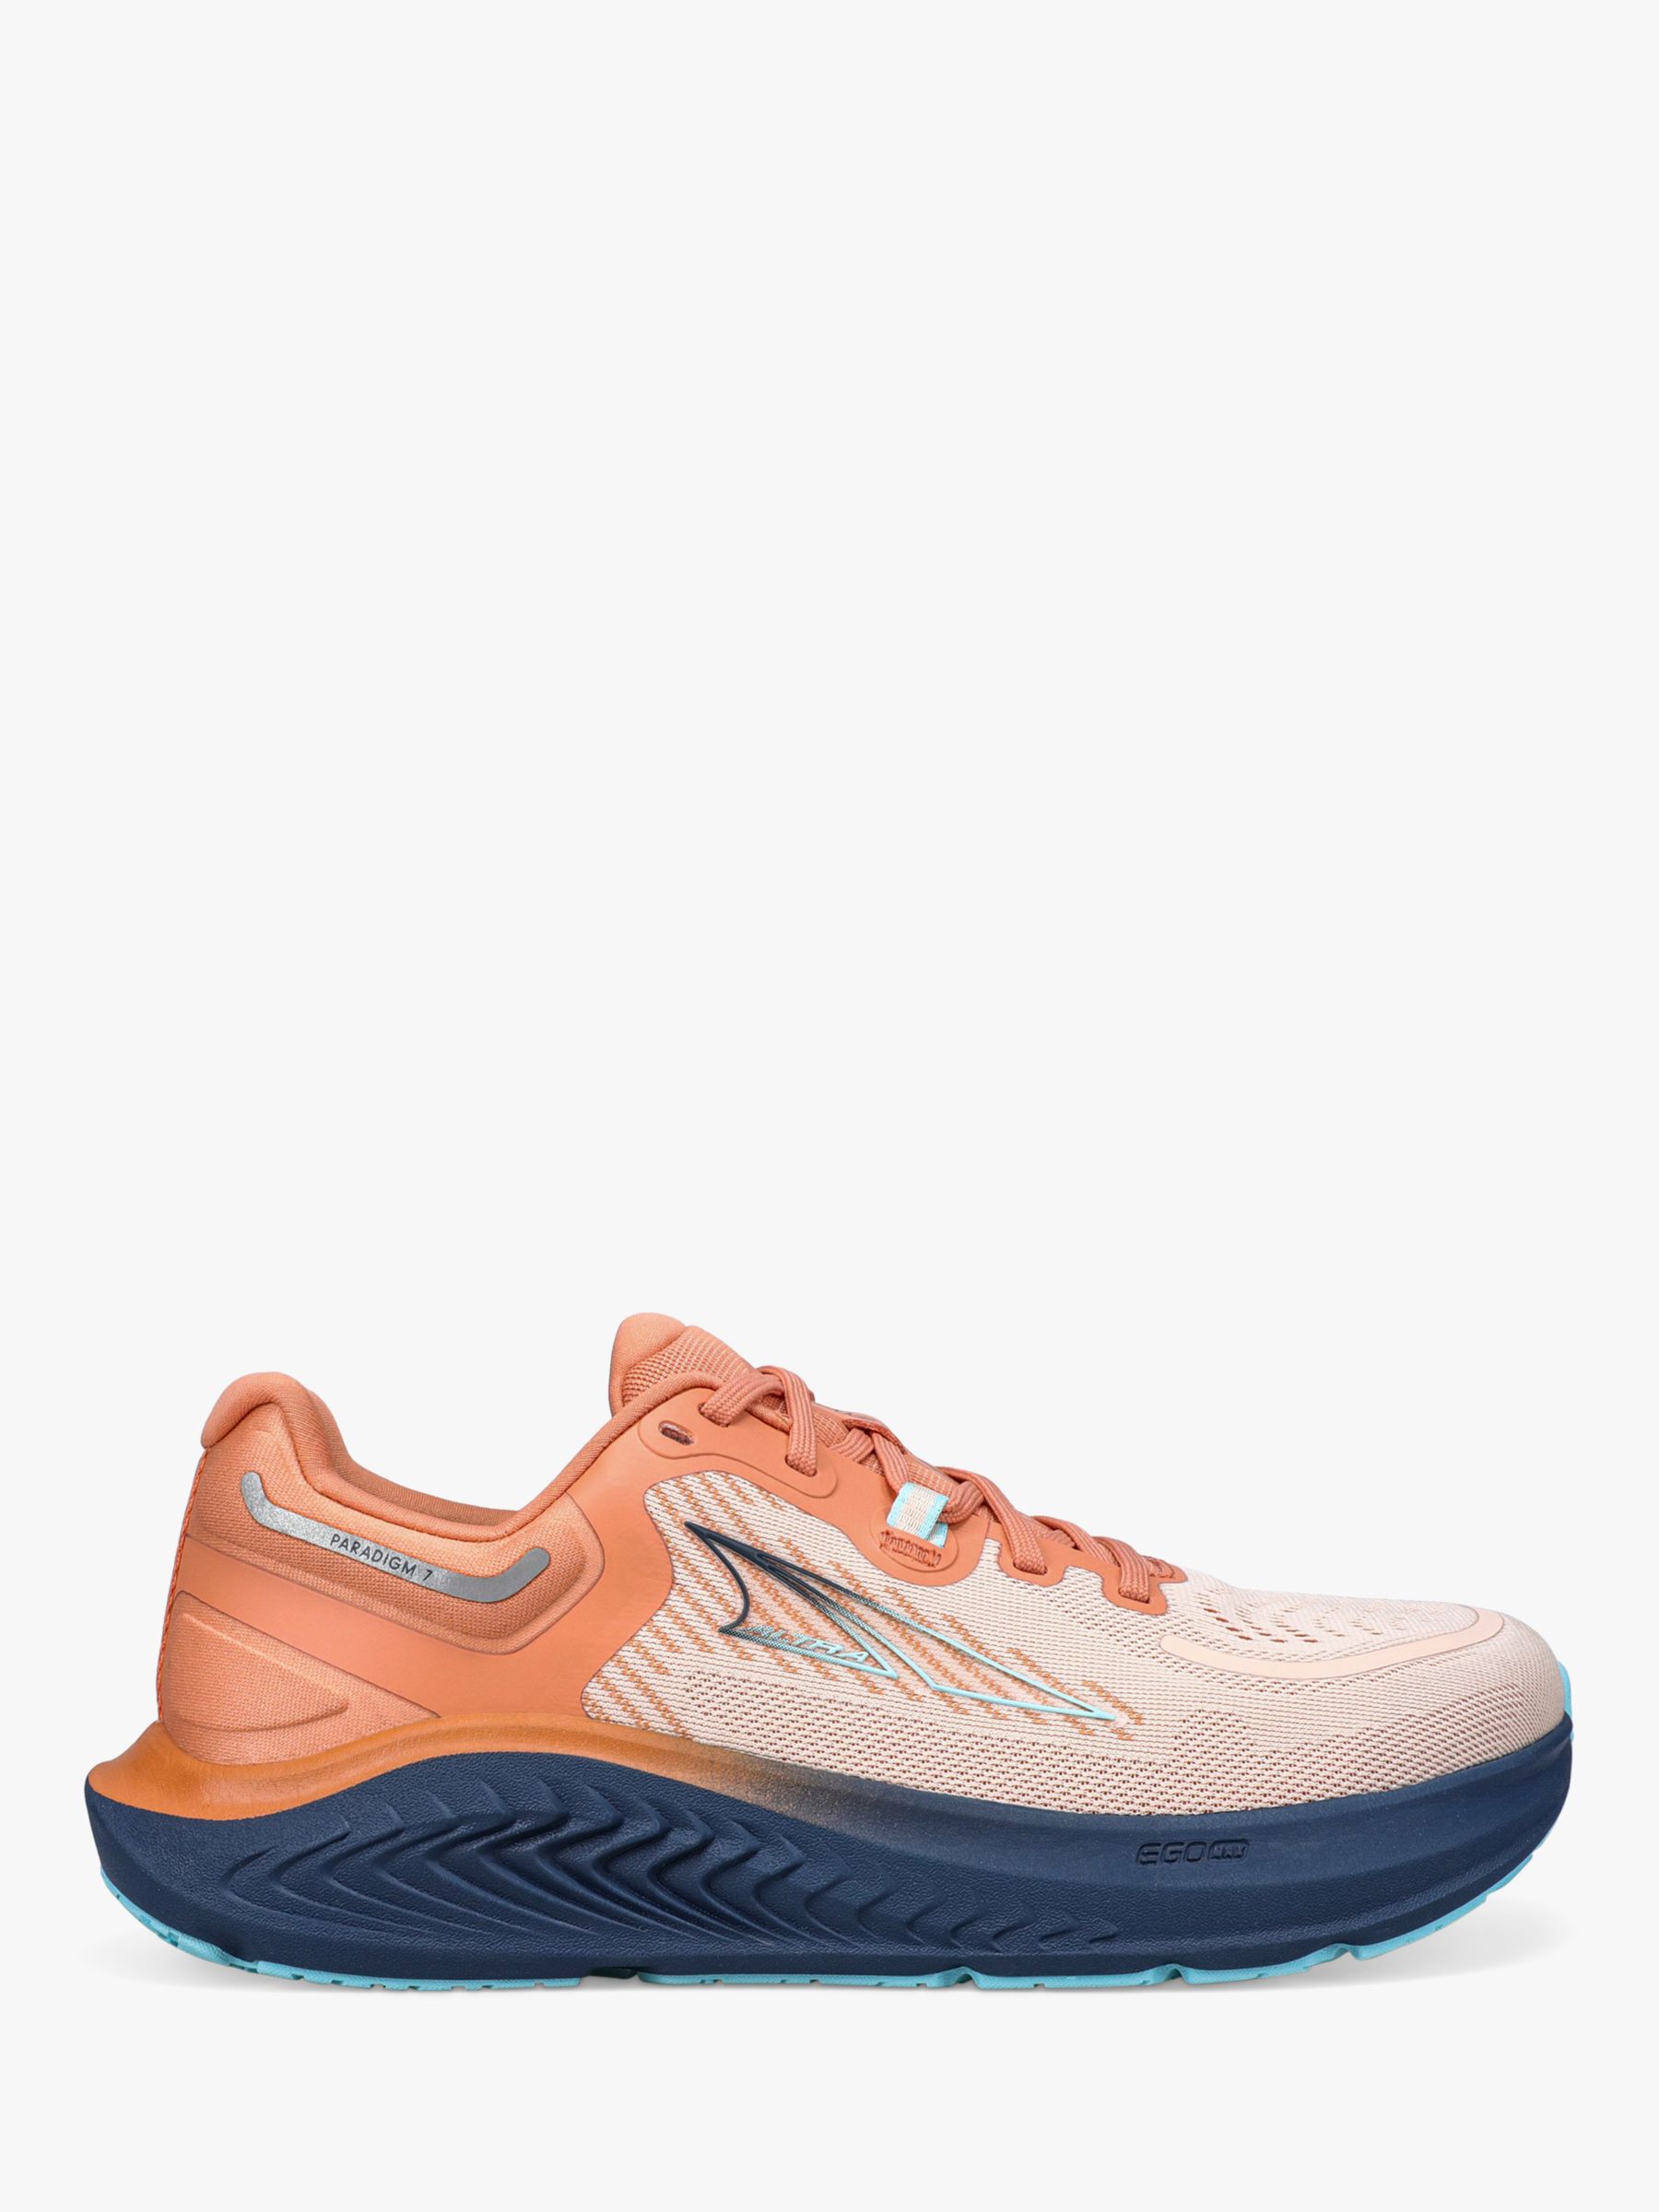 Altra Paradigm 7 Women's Running Shoes, Navy/Coral